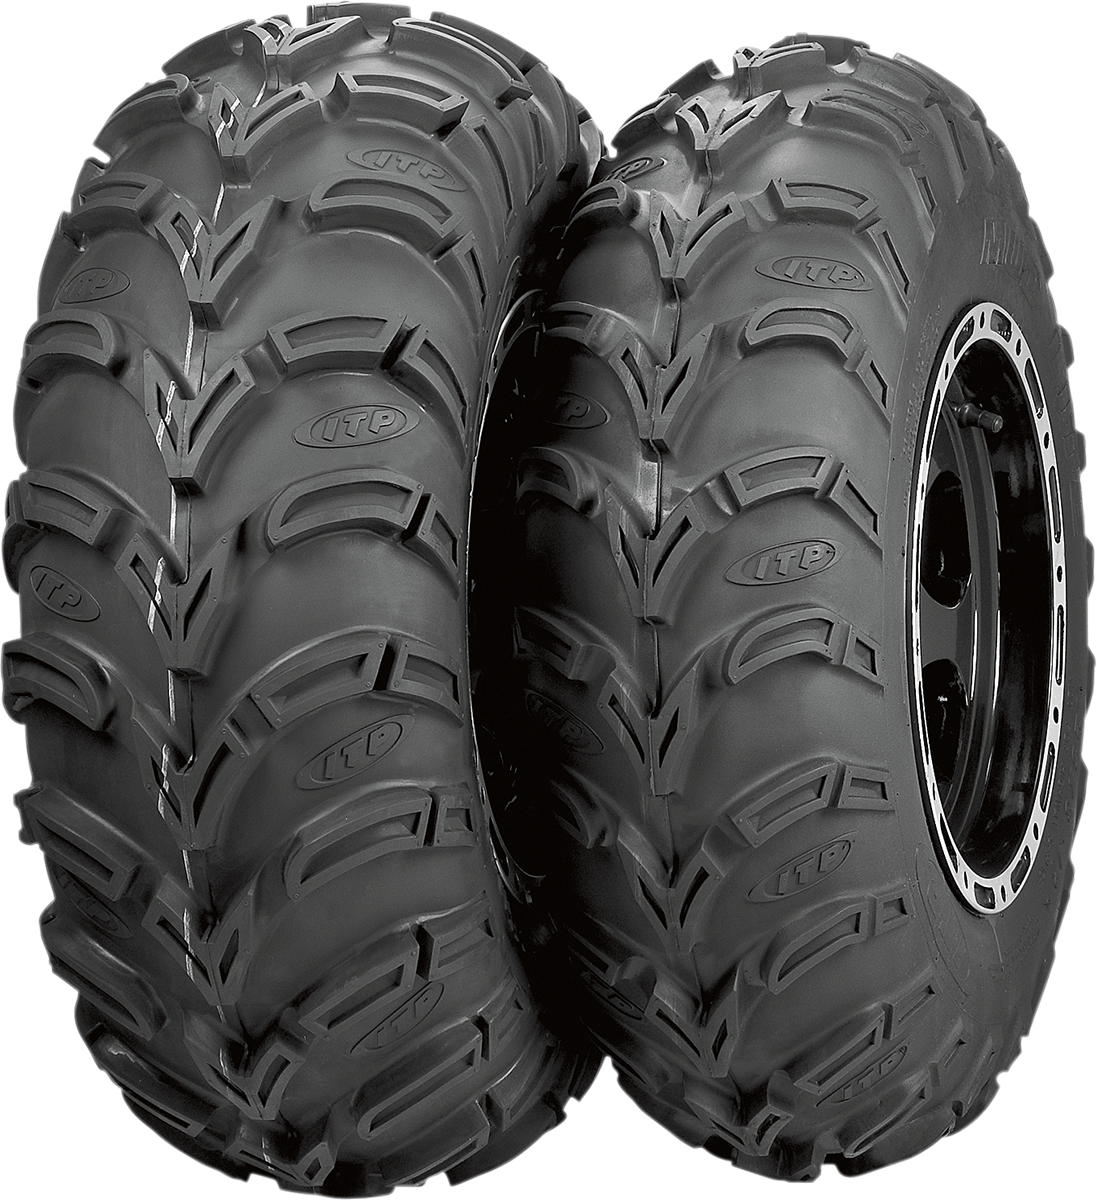 ITP Tire - Mud Lite XL - Front/Rear - 27x12-14 - 6 Ply 560456